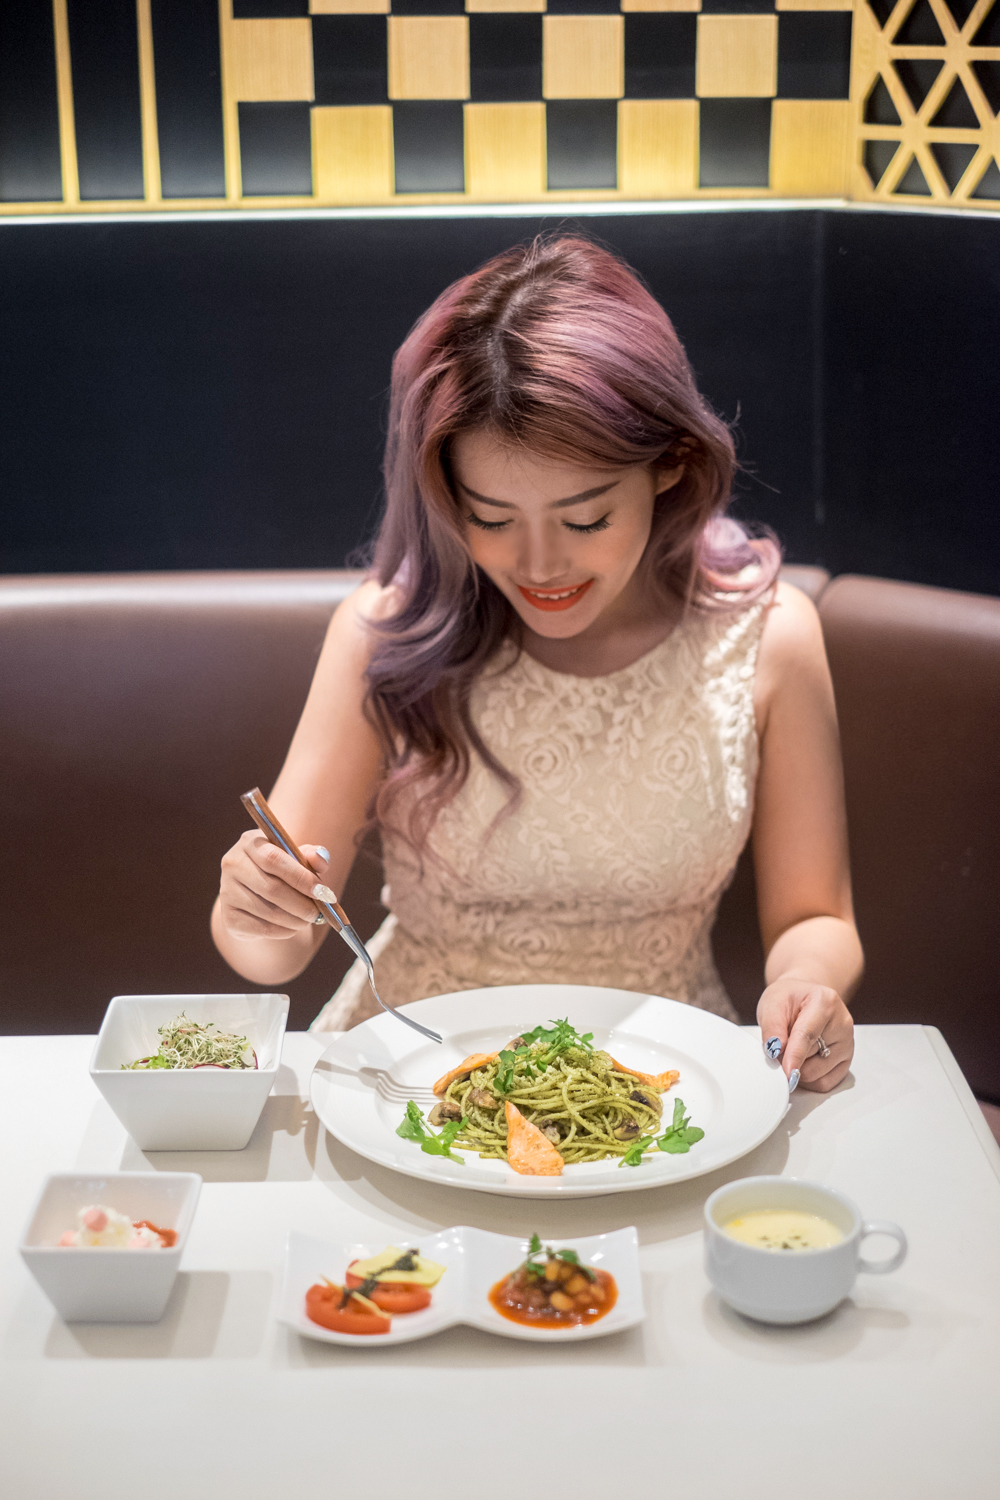 Dinner Menu at MOS Cafe Jakarta - Stella Lee ☆ Indonesia Beauty and